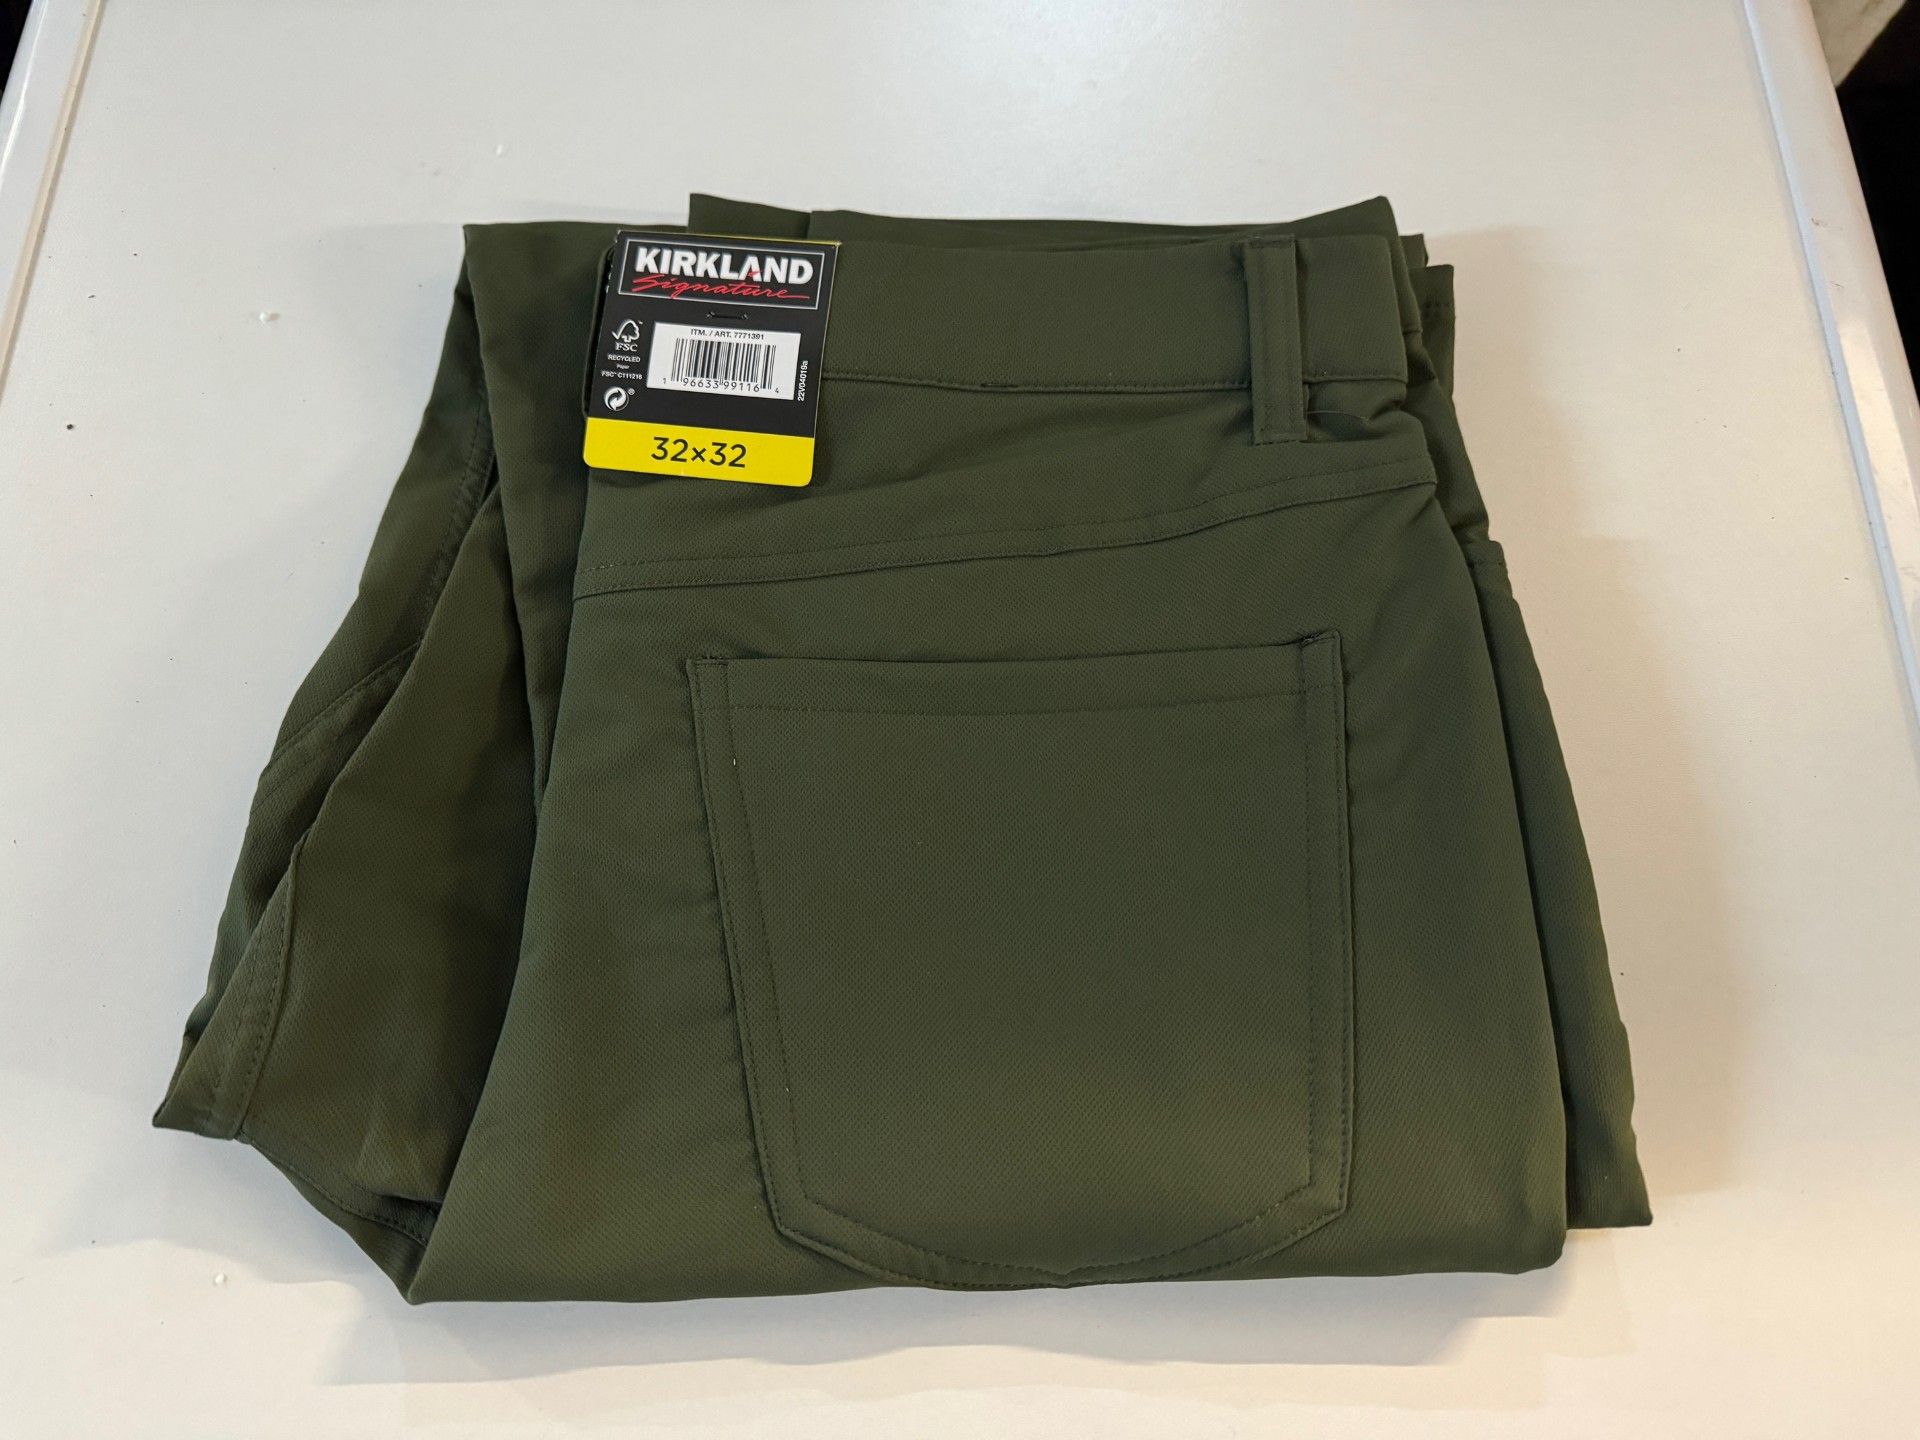 1 BRAND NEW MENS KIRKLAND SIGNATURE MOISTURE WICKING STRETCH PERFOMANCE PANTS IN OLIVE GREEN SIZE